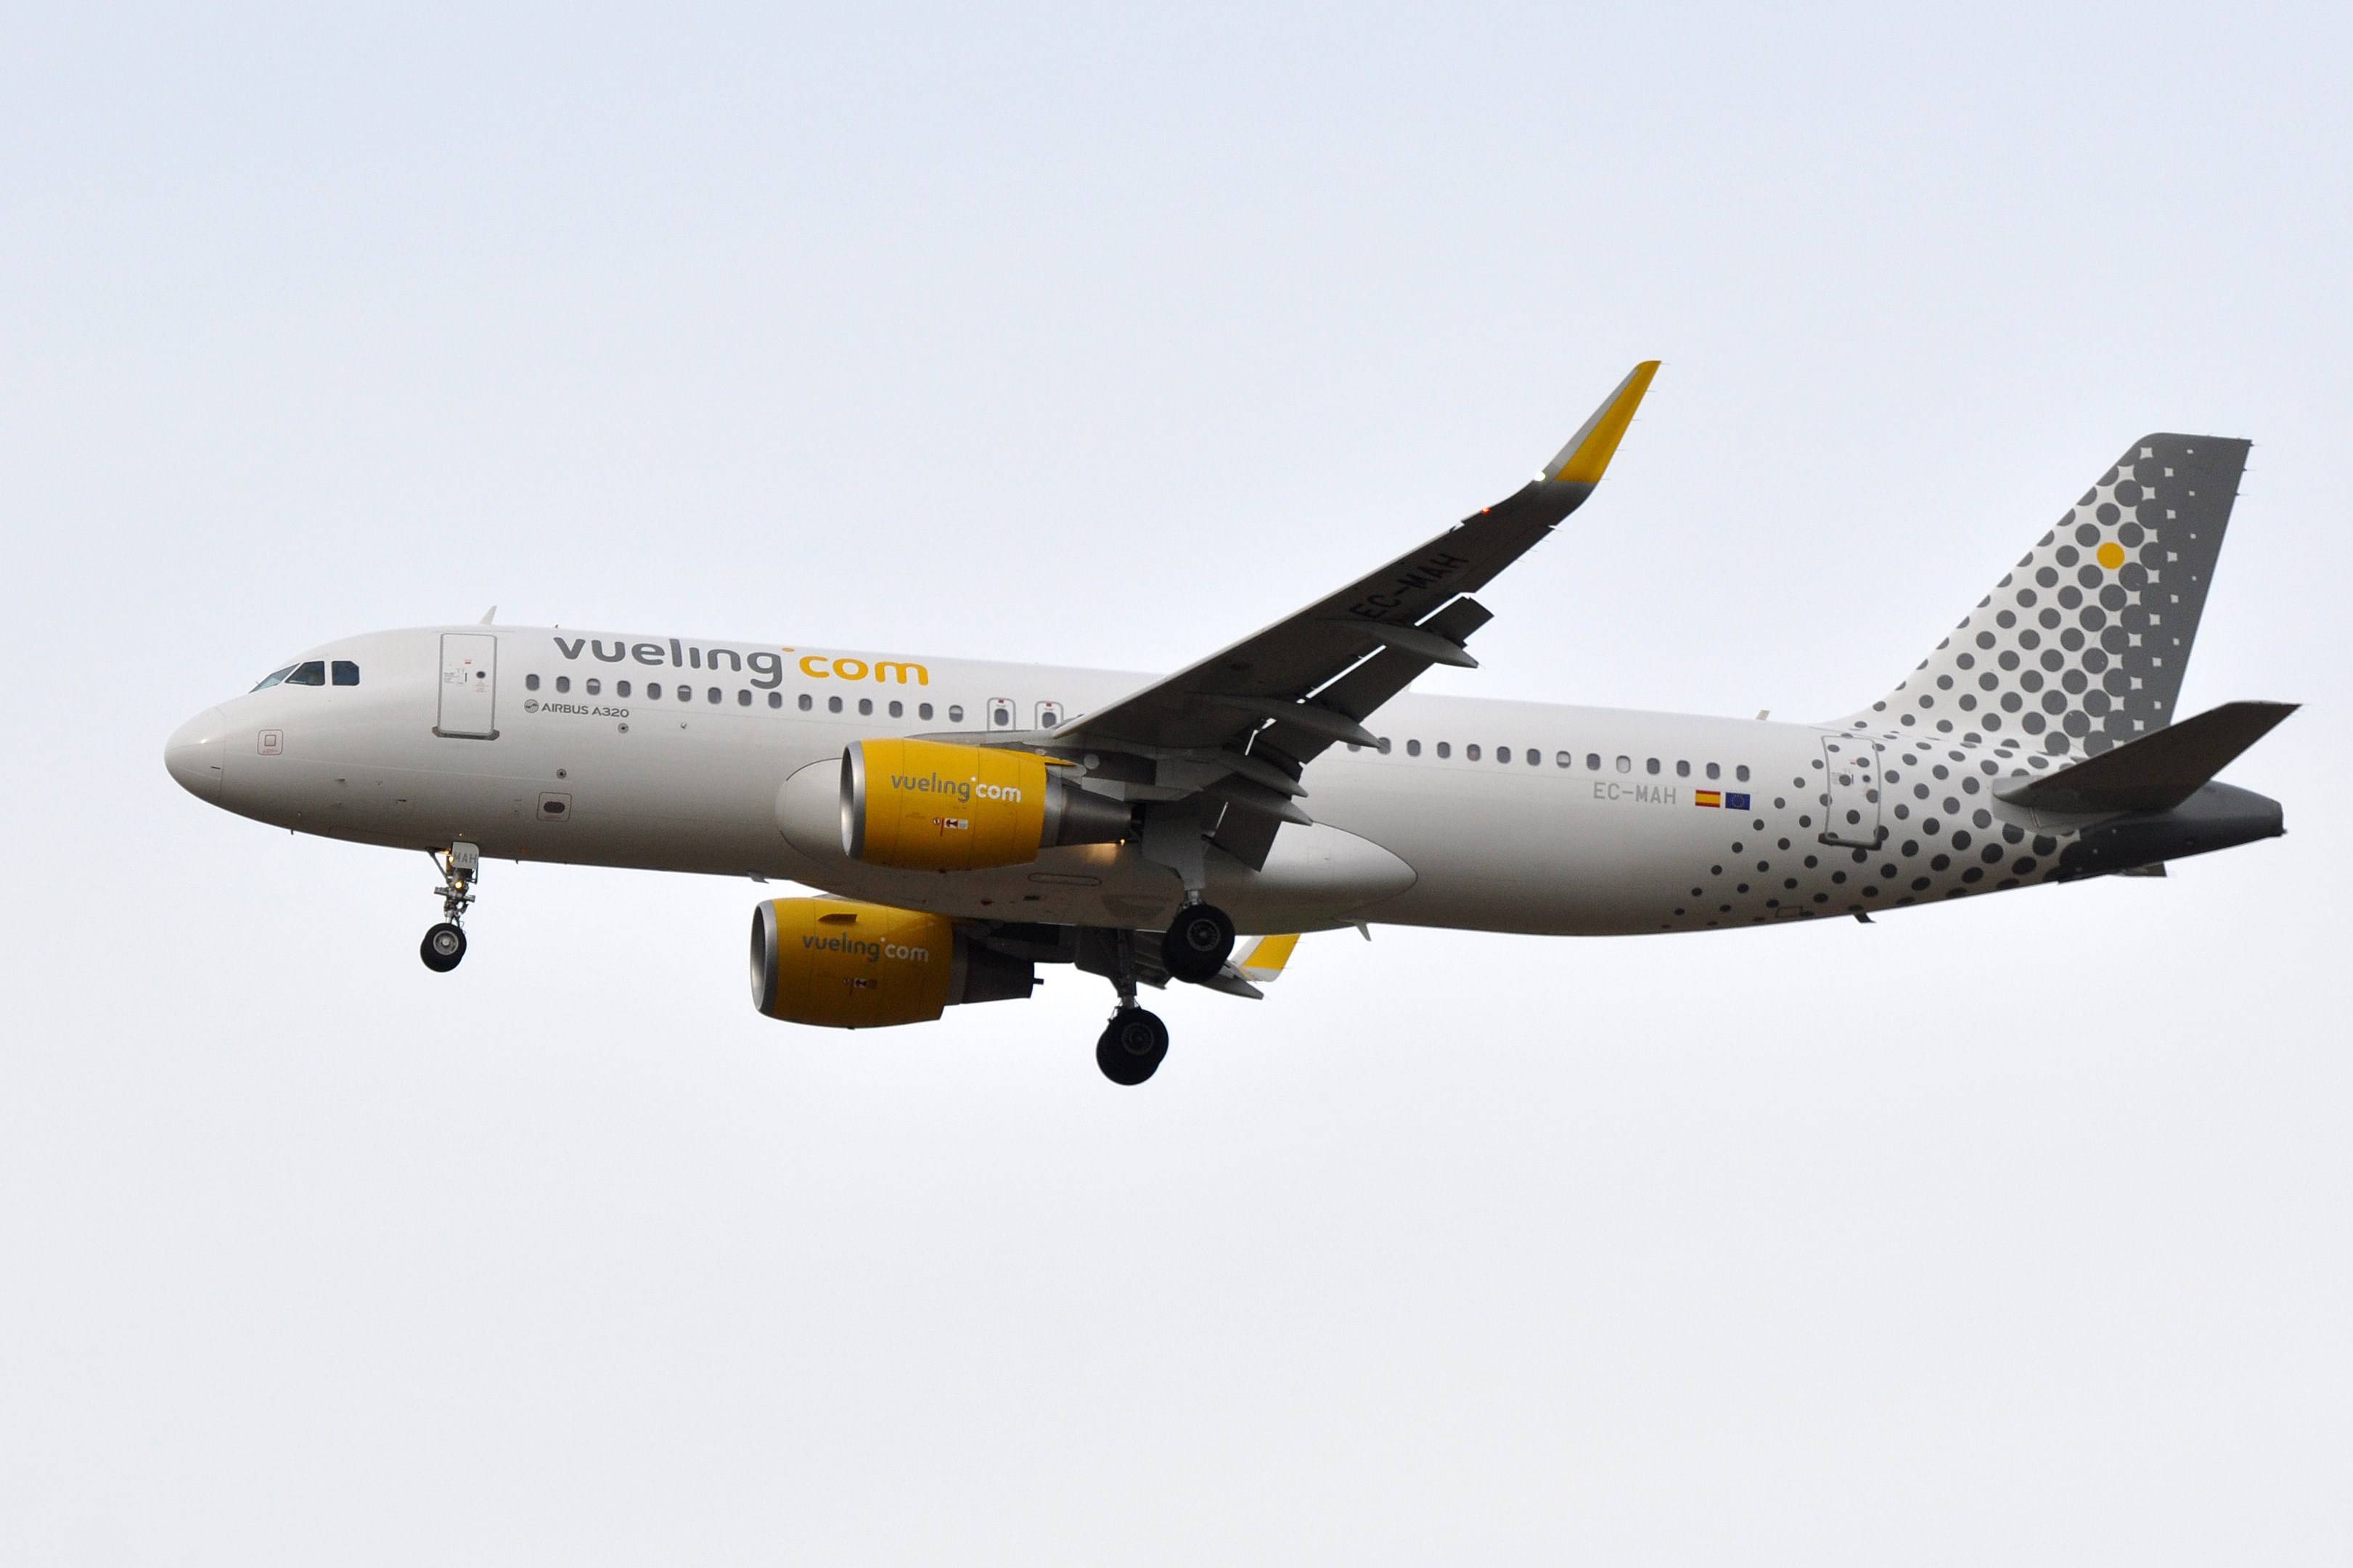 Vueling airlines